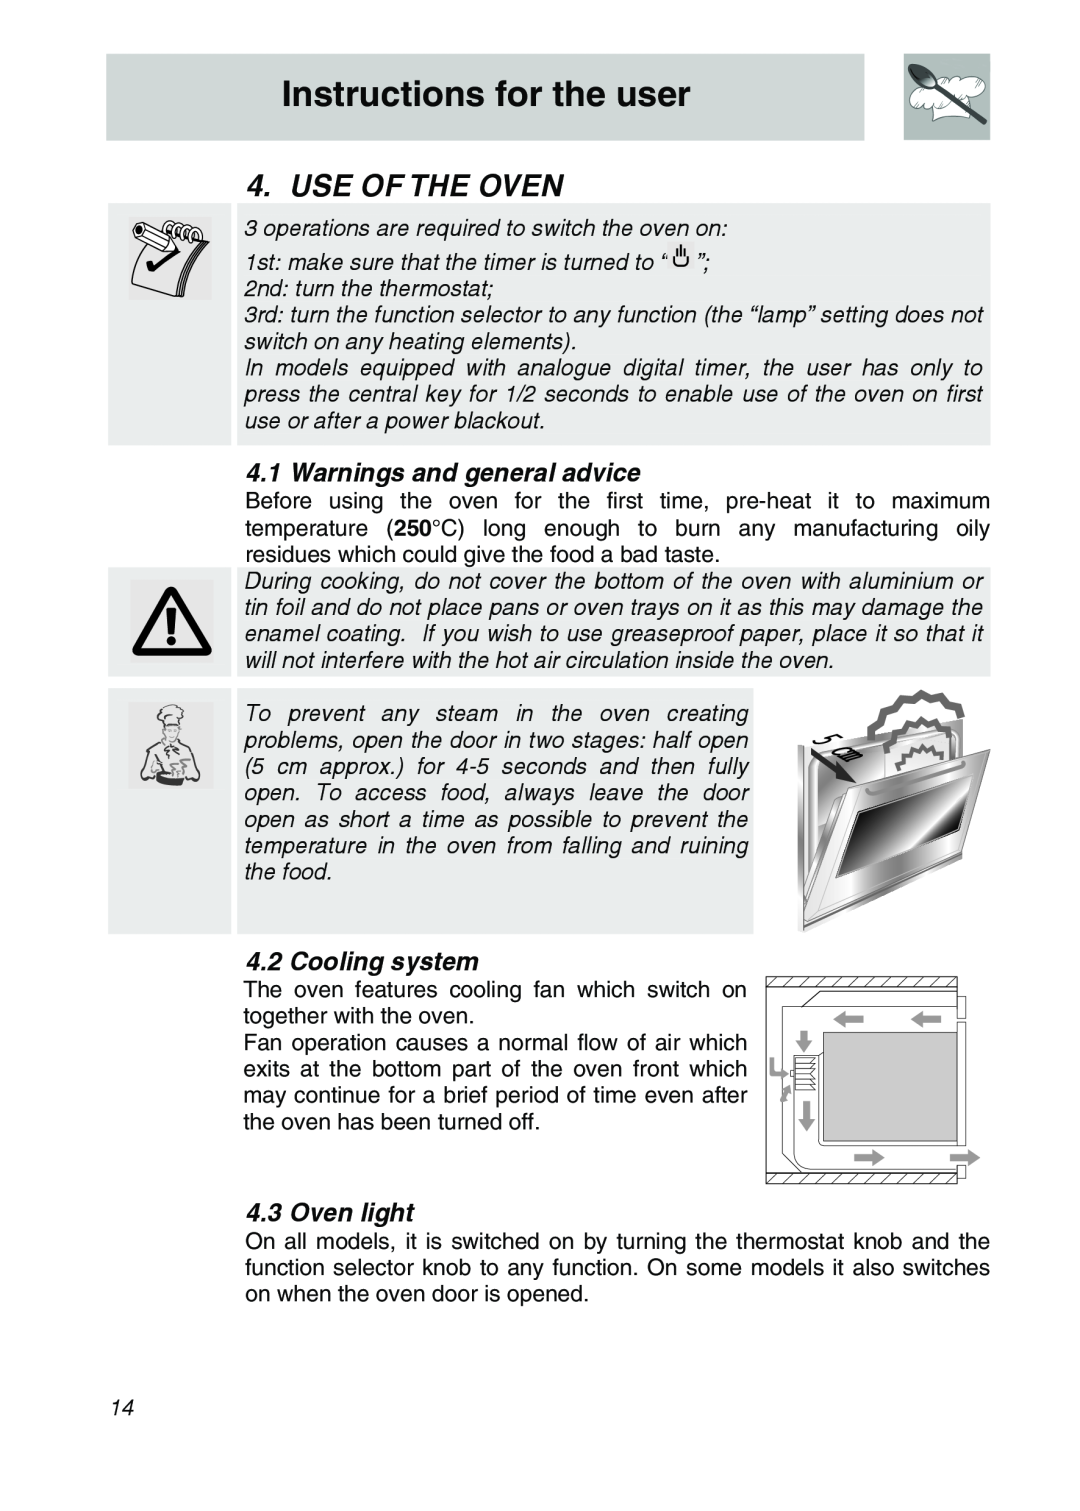 Smeg FA170, FA166-5 Use Of The Oven, Warnings and general advice, Cooling system, Oven light, Instructions for the user 